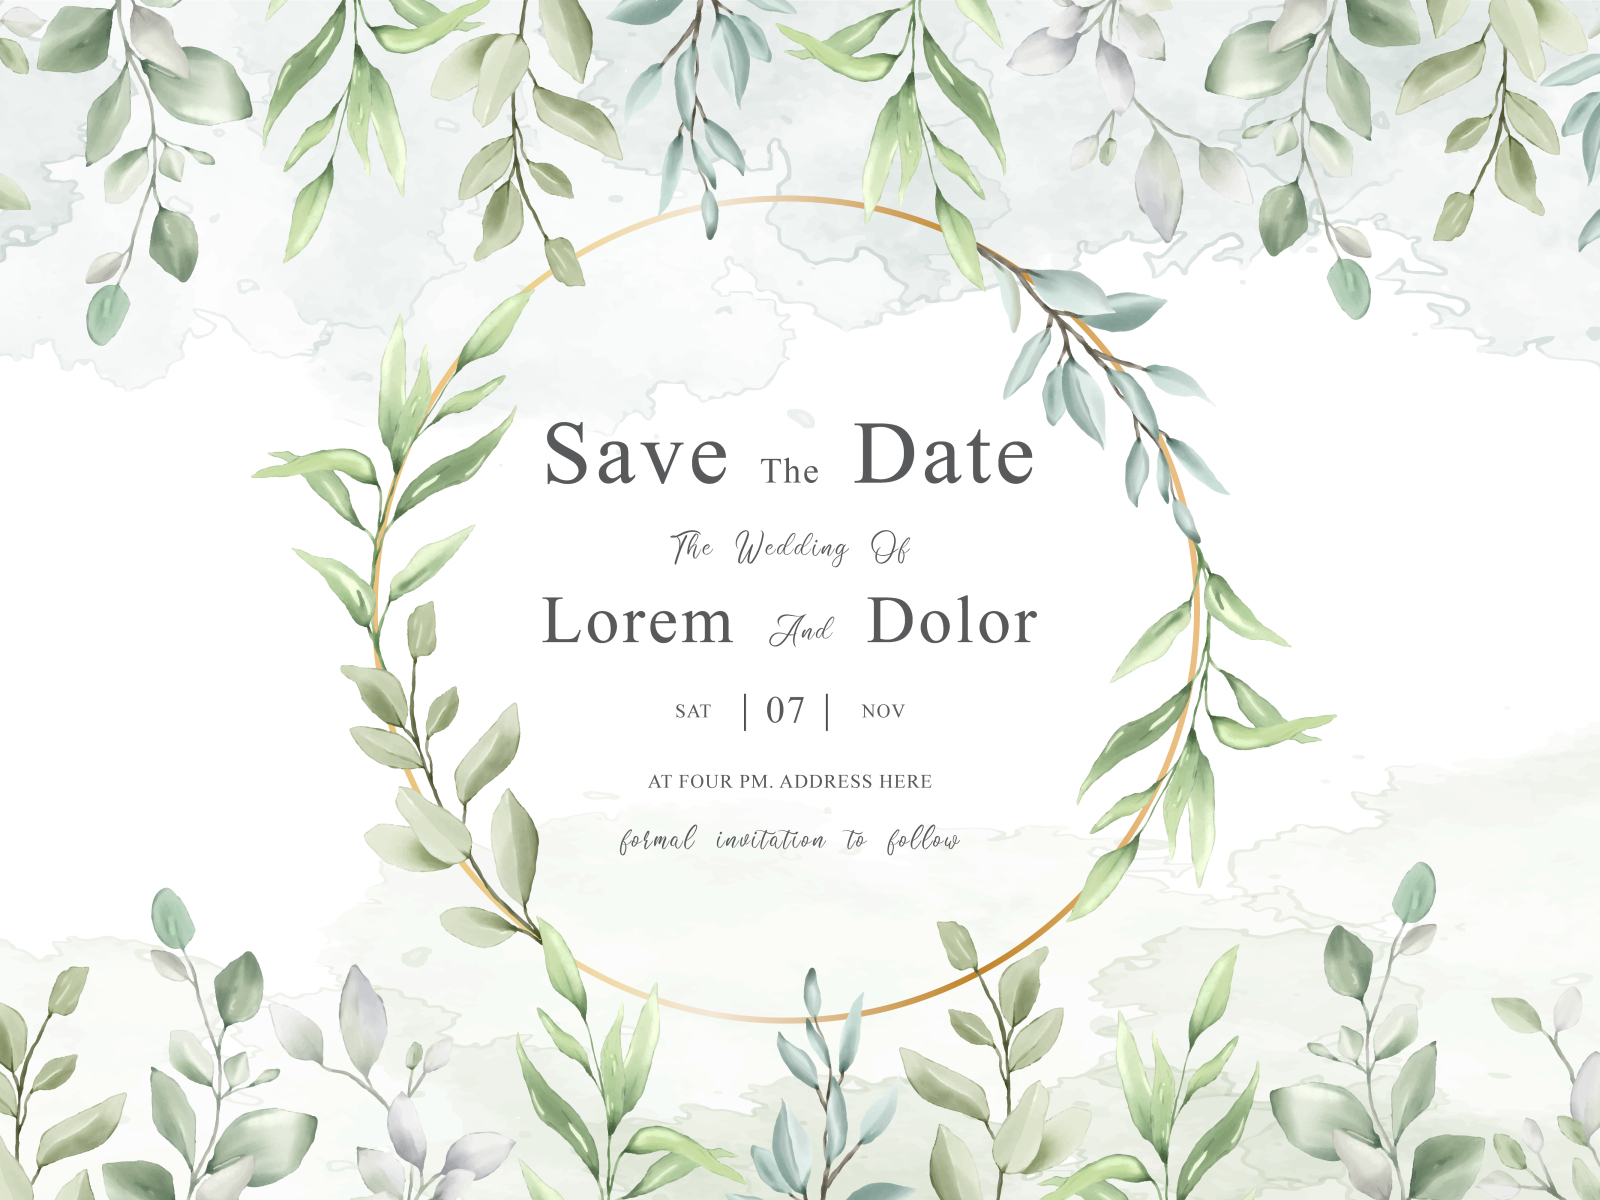 Wedding frames multi purpose design with watercolor background by Federiqo   on Dribbble